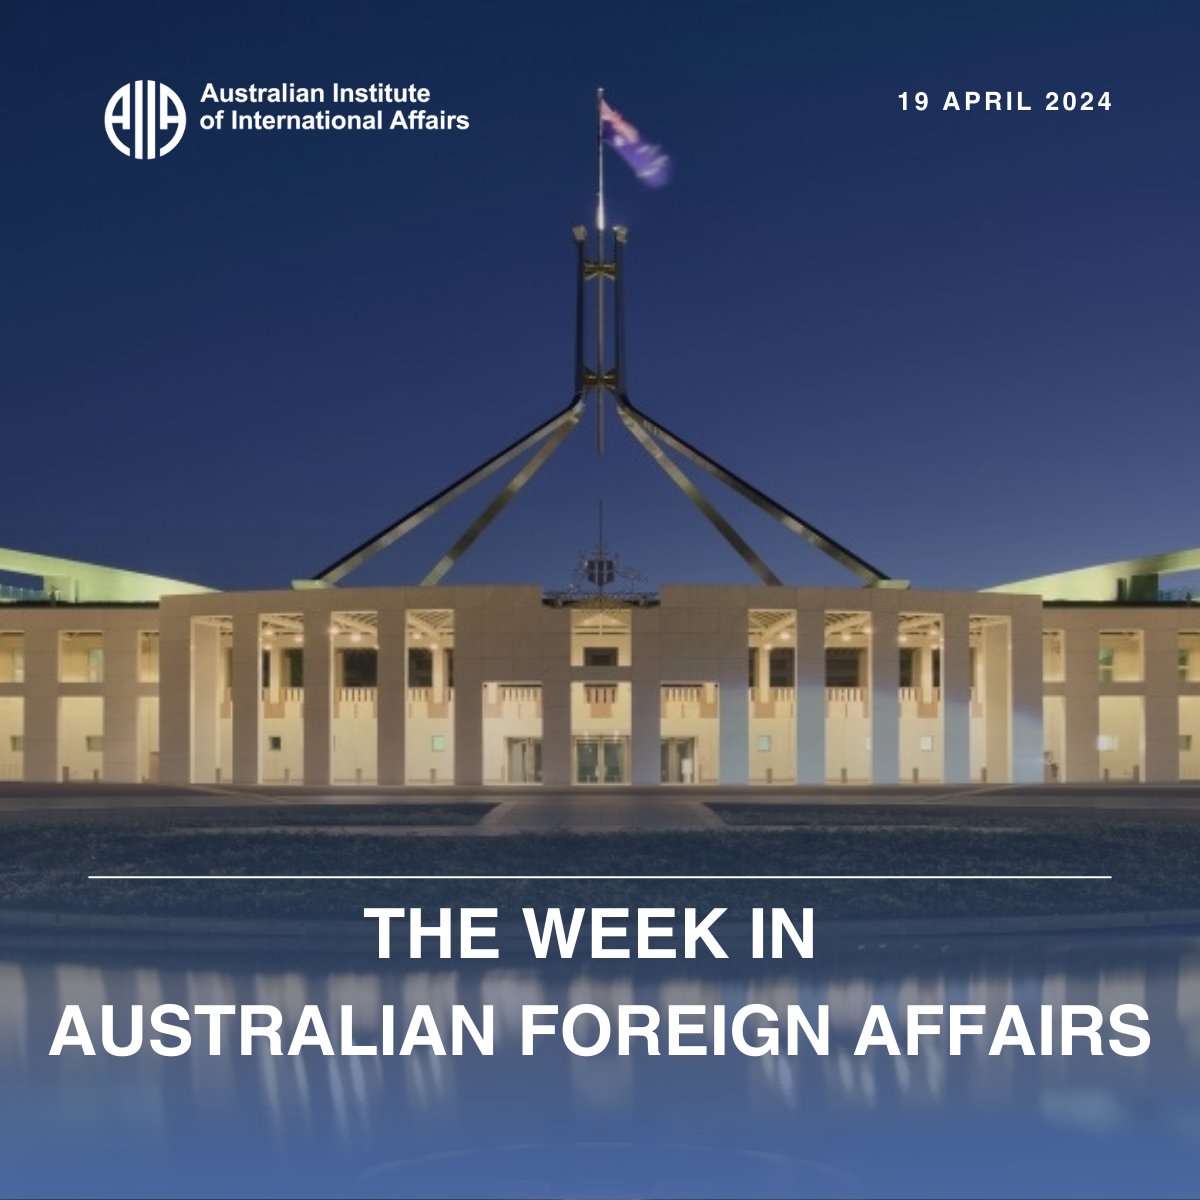 19 April 2024: “new support for Solomon Islands elections; Wong discusses potential momentum on Assange case; PALM workers to boost aged care; Ayers to Singapore and Malaysia,” by Adam Bartley Read more at The Week in Australian Foreign Affairs👇 ow.ly/R0cQ50RkM9S